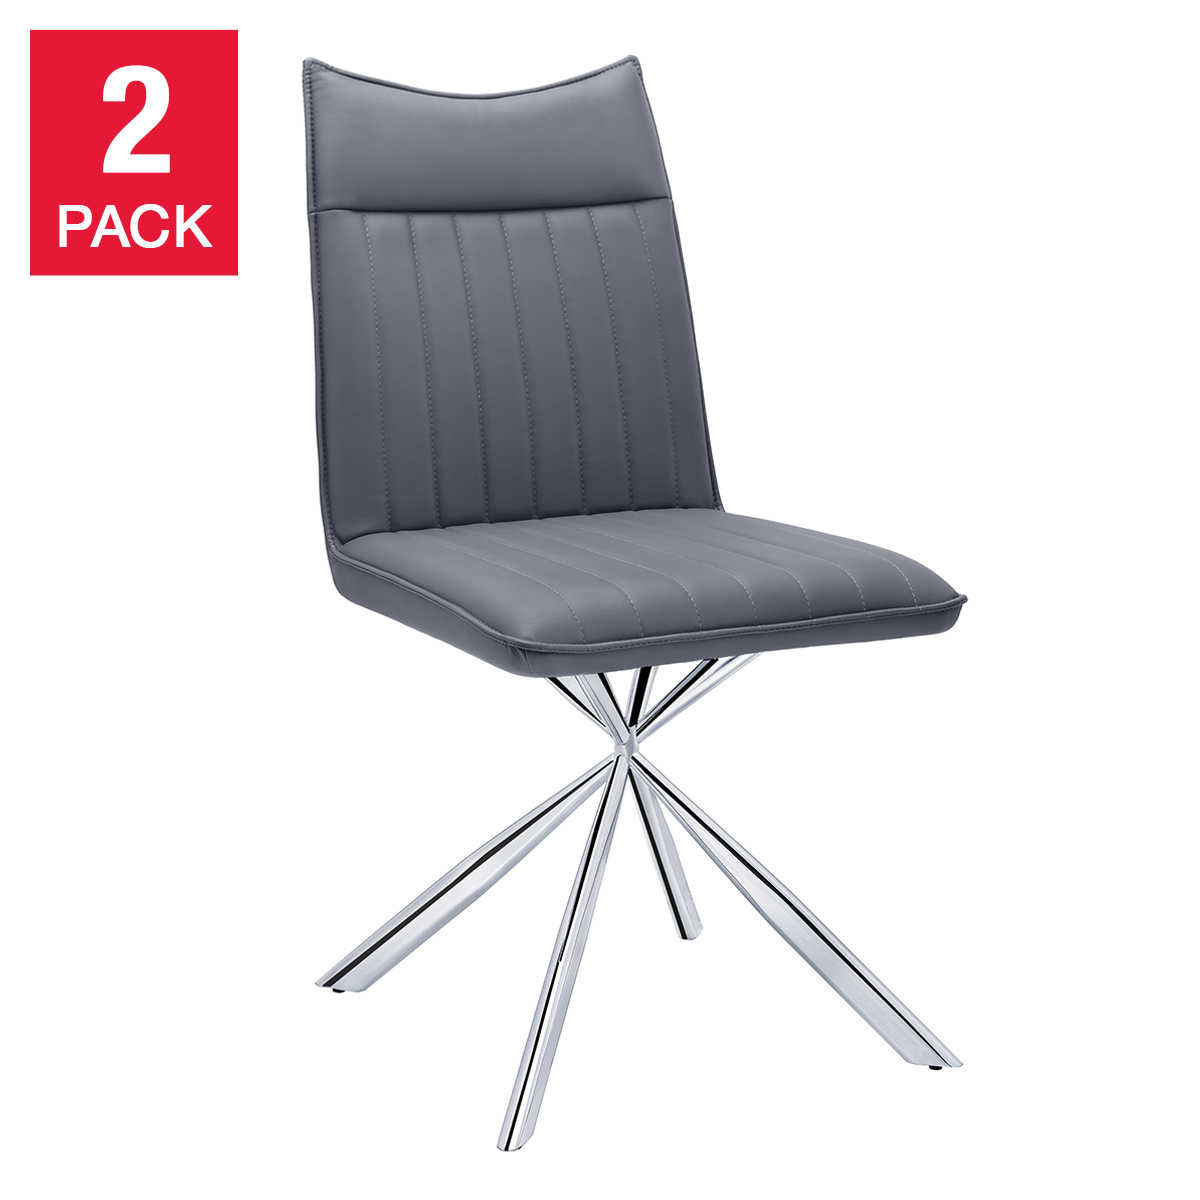 Lind Modern Dining Chair 2 Pack With, Contemporary Leather Chrome Dining Chairs